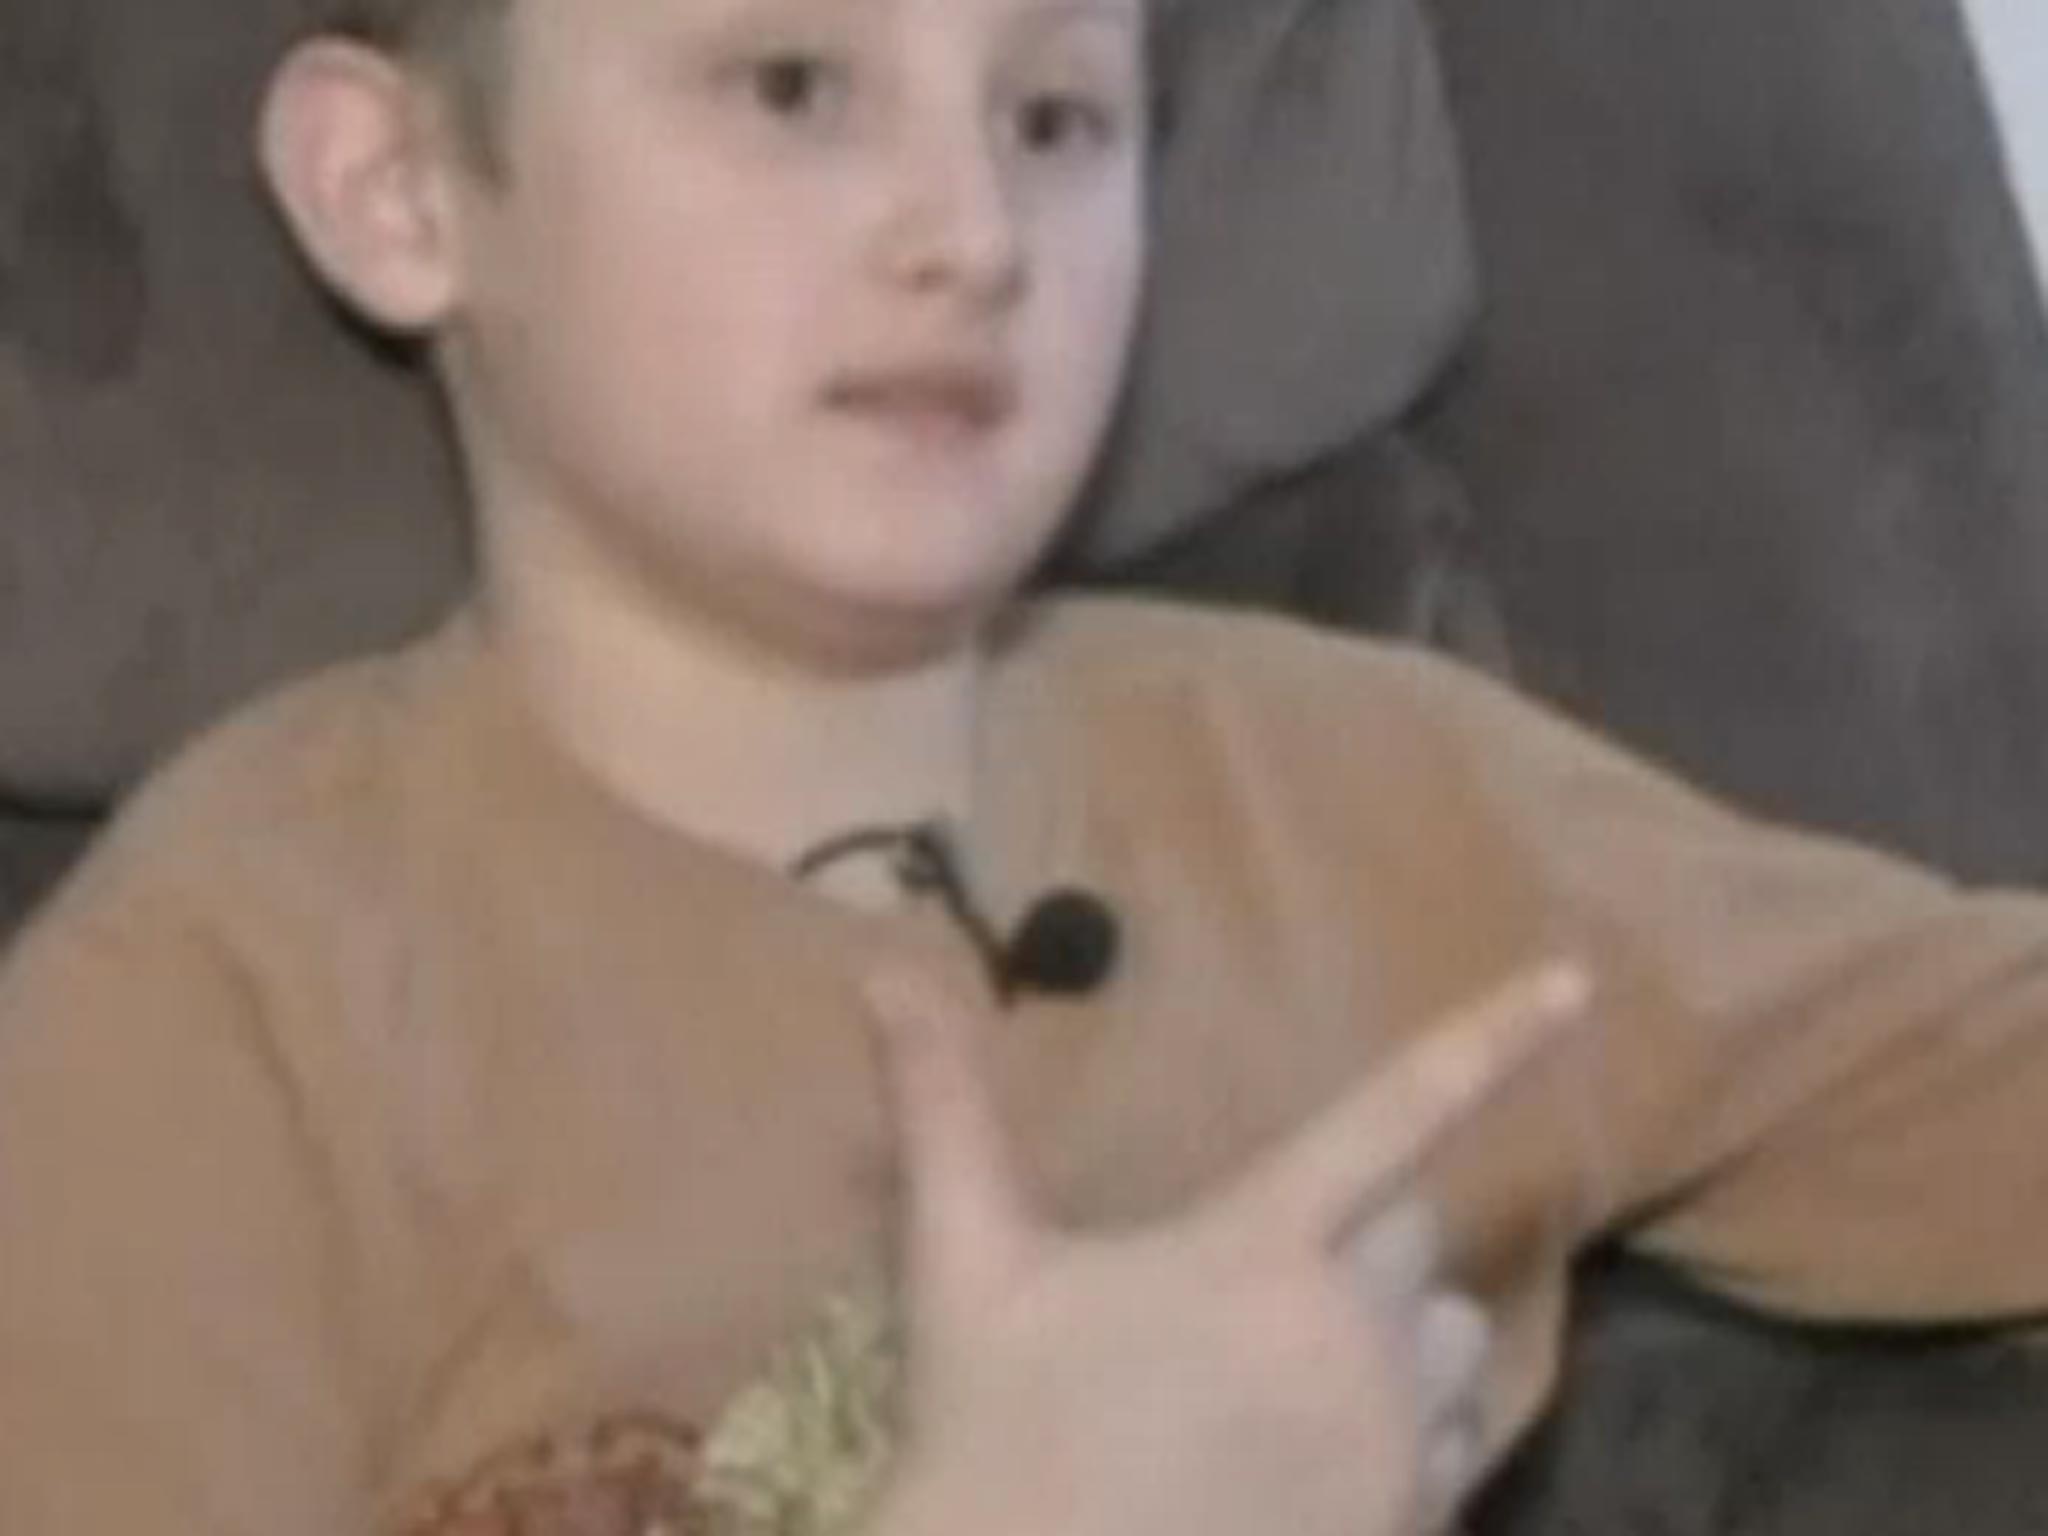 The young boy from Ohio was suspended after making his hand into a gun shape